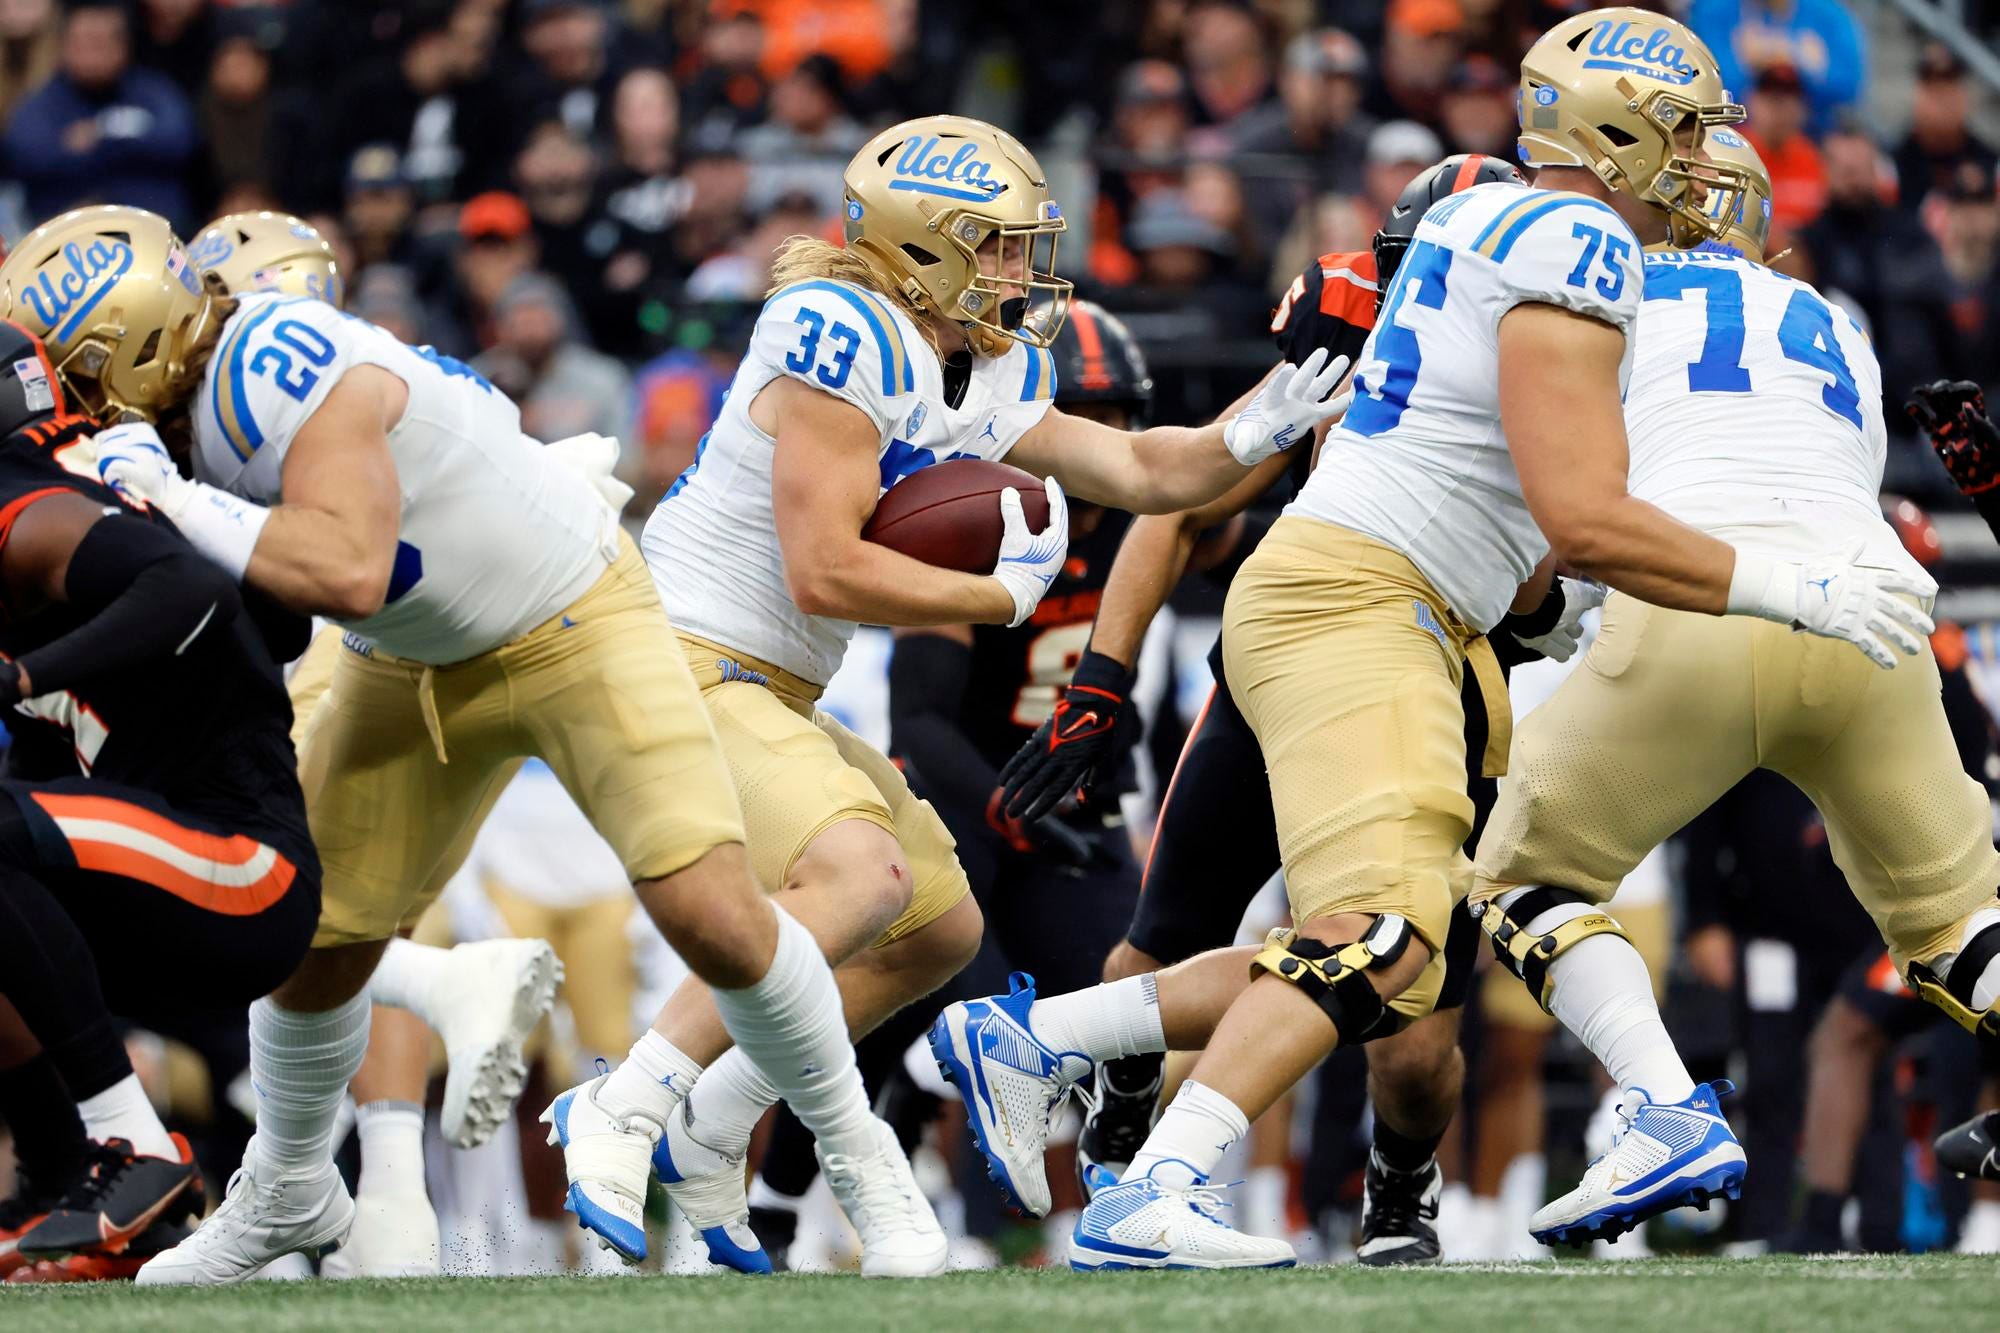 Will Dante Moore and UCLA's offense be better when the Bruins face